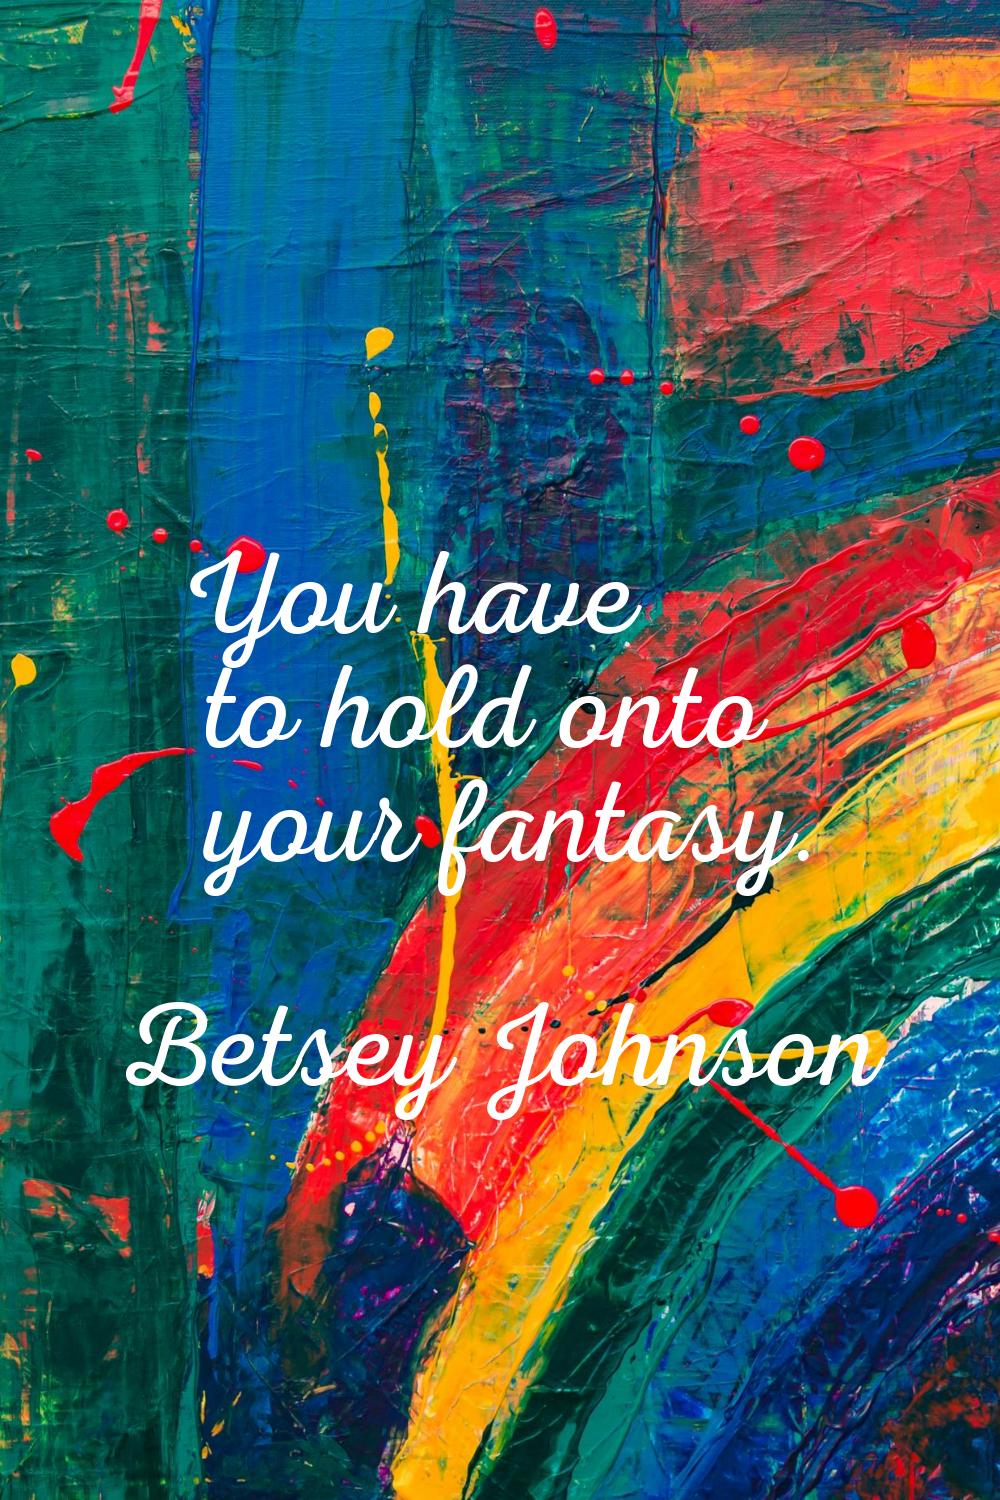 You have to hold onto your fantasy.